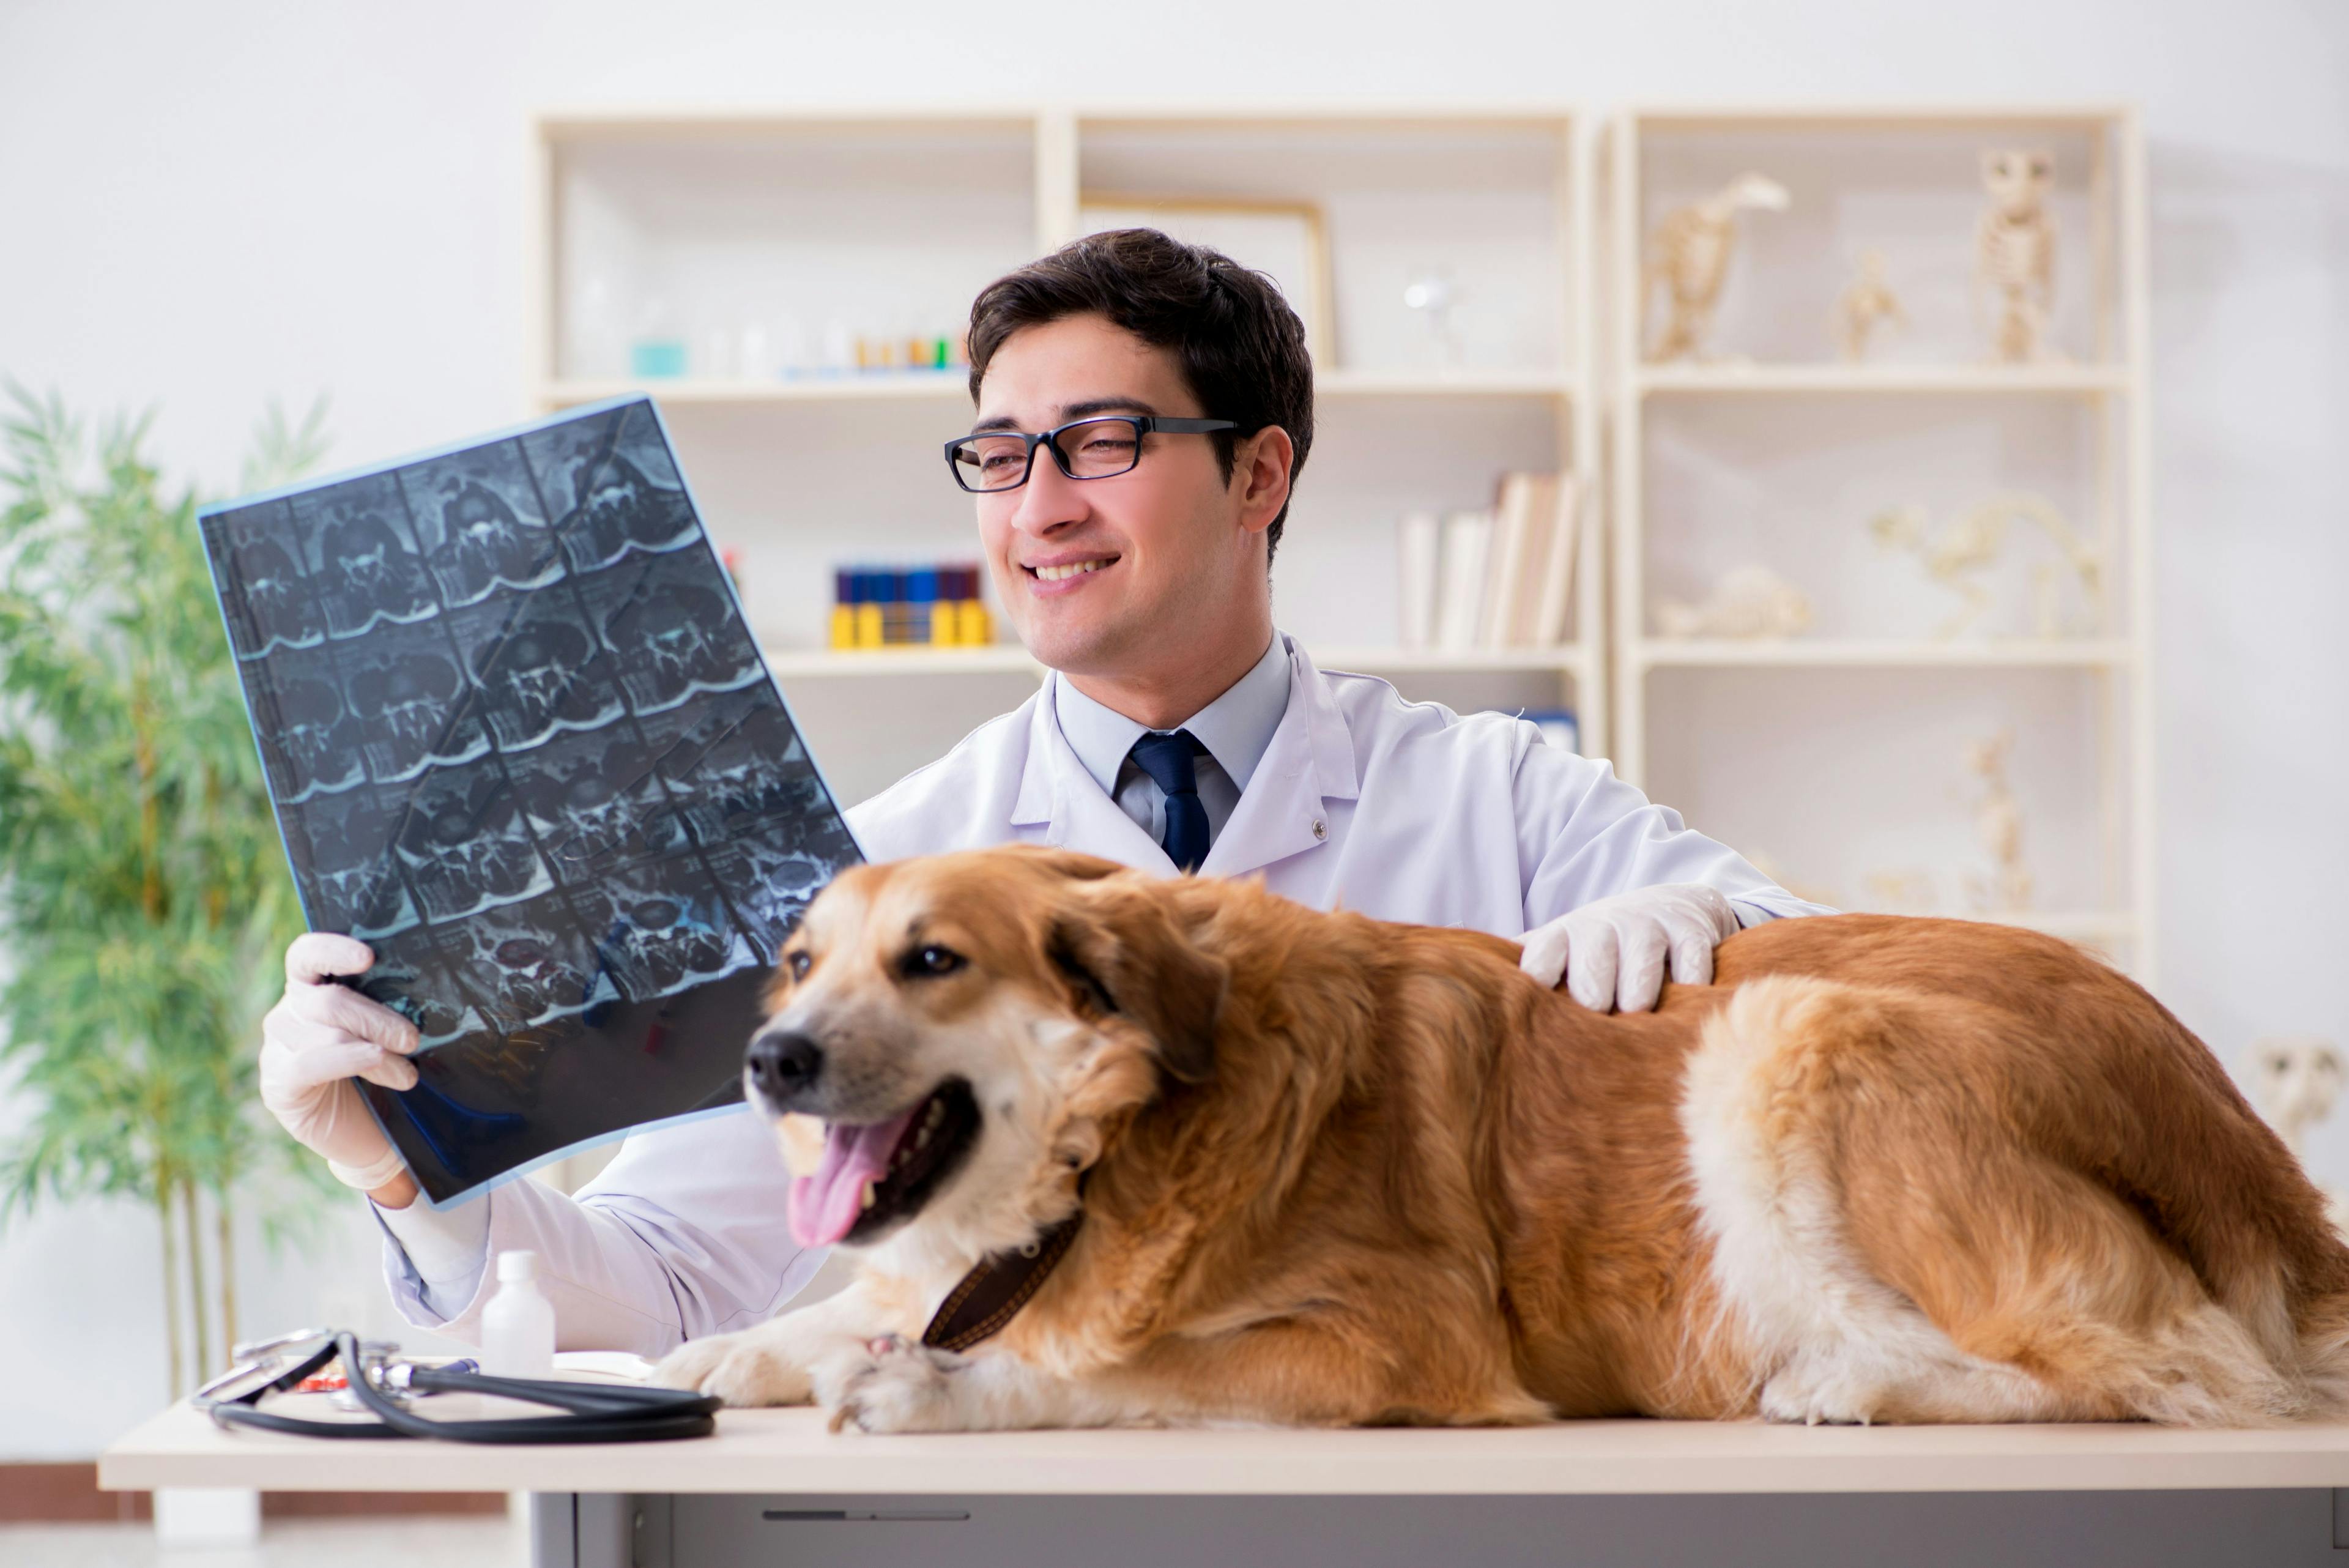 Neurologic imaging know-how: What they didn’t teach in vet school